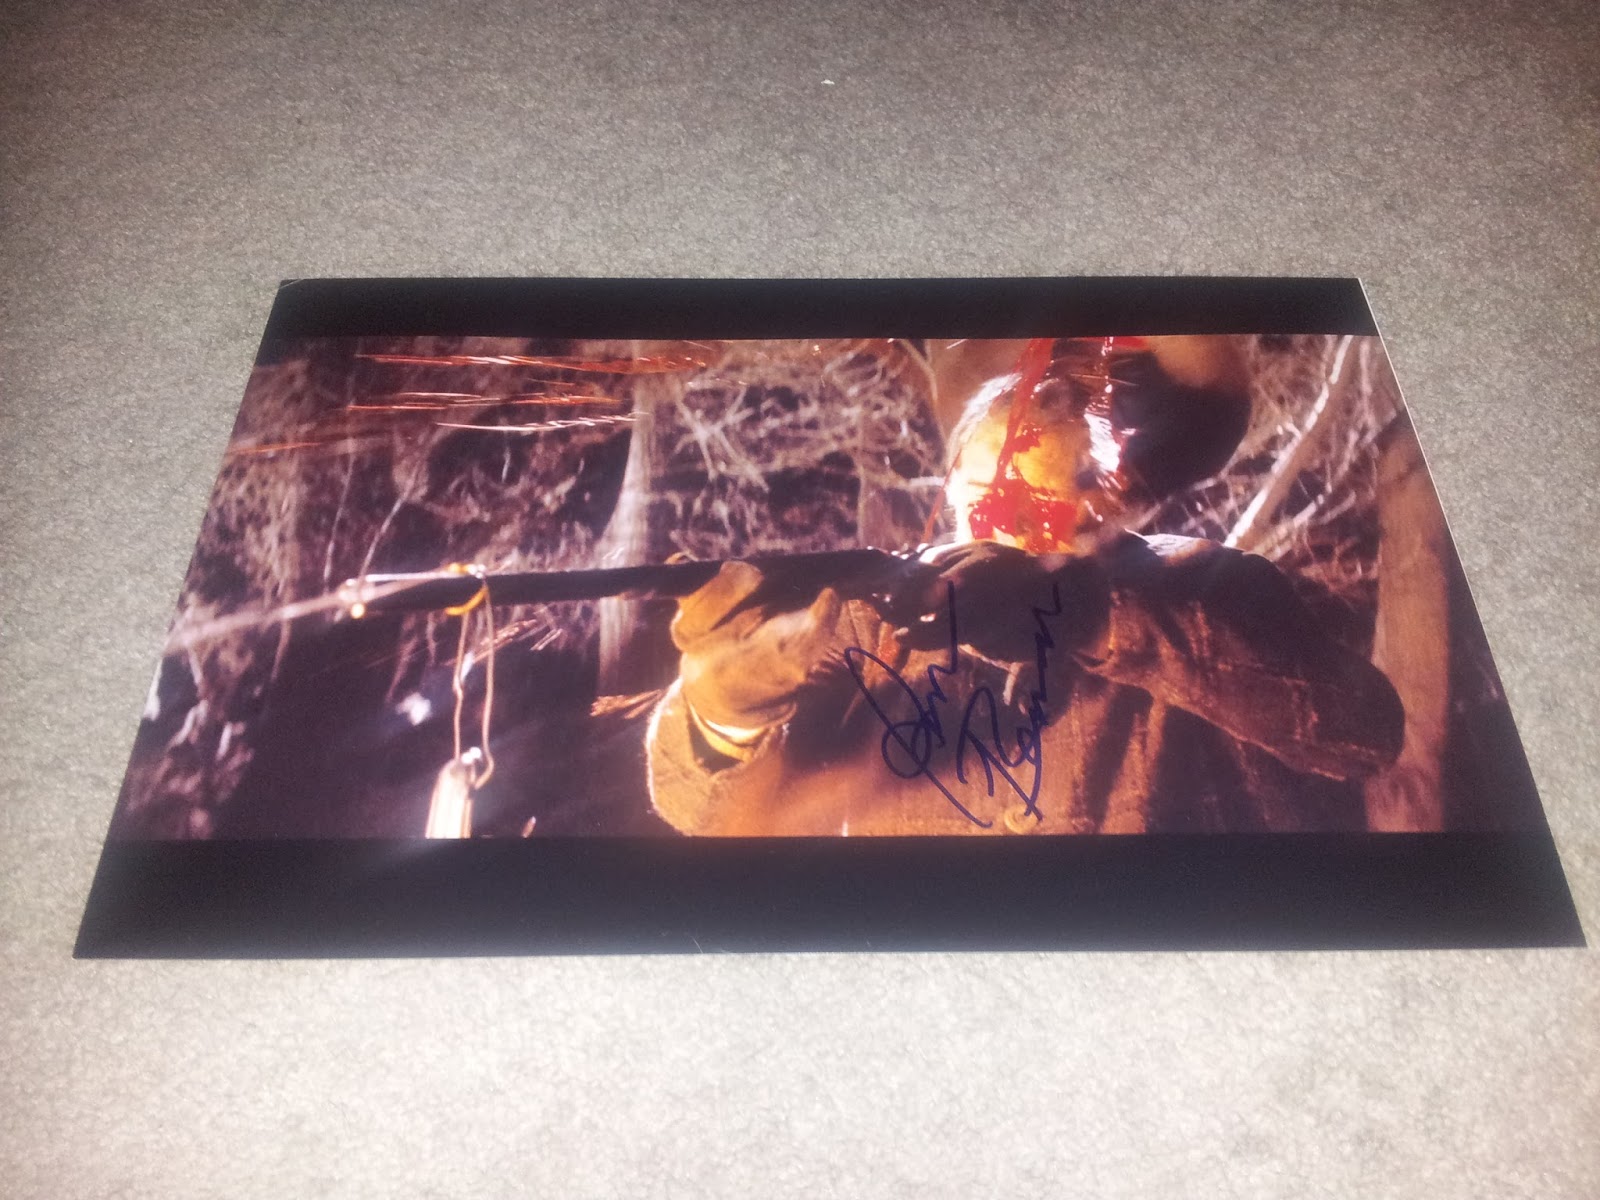 Will The Autograph Guy Butch Pooch Ace Speck Aka James Remar Of Django Unchained Autographs Photos